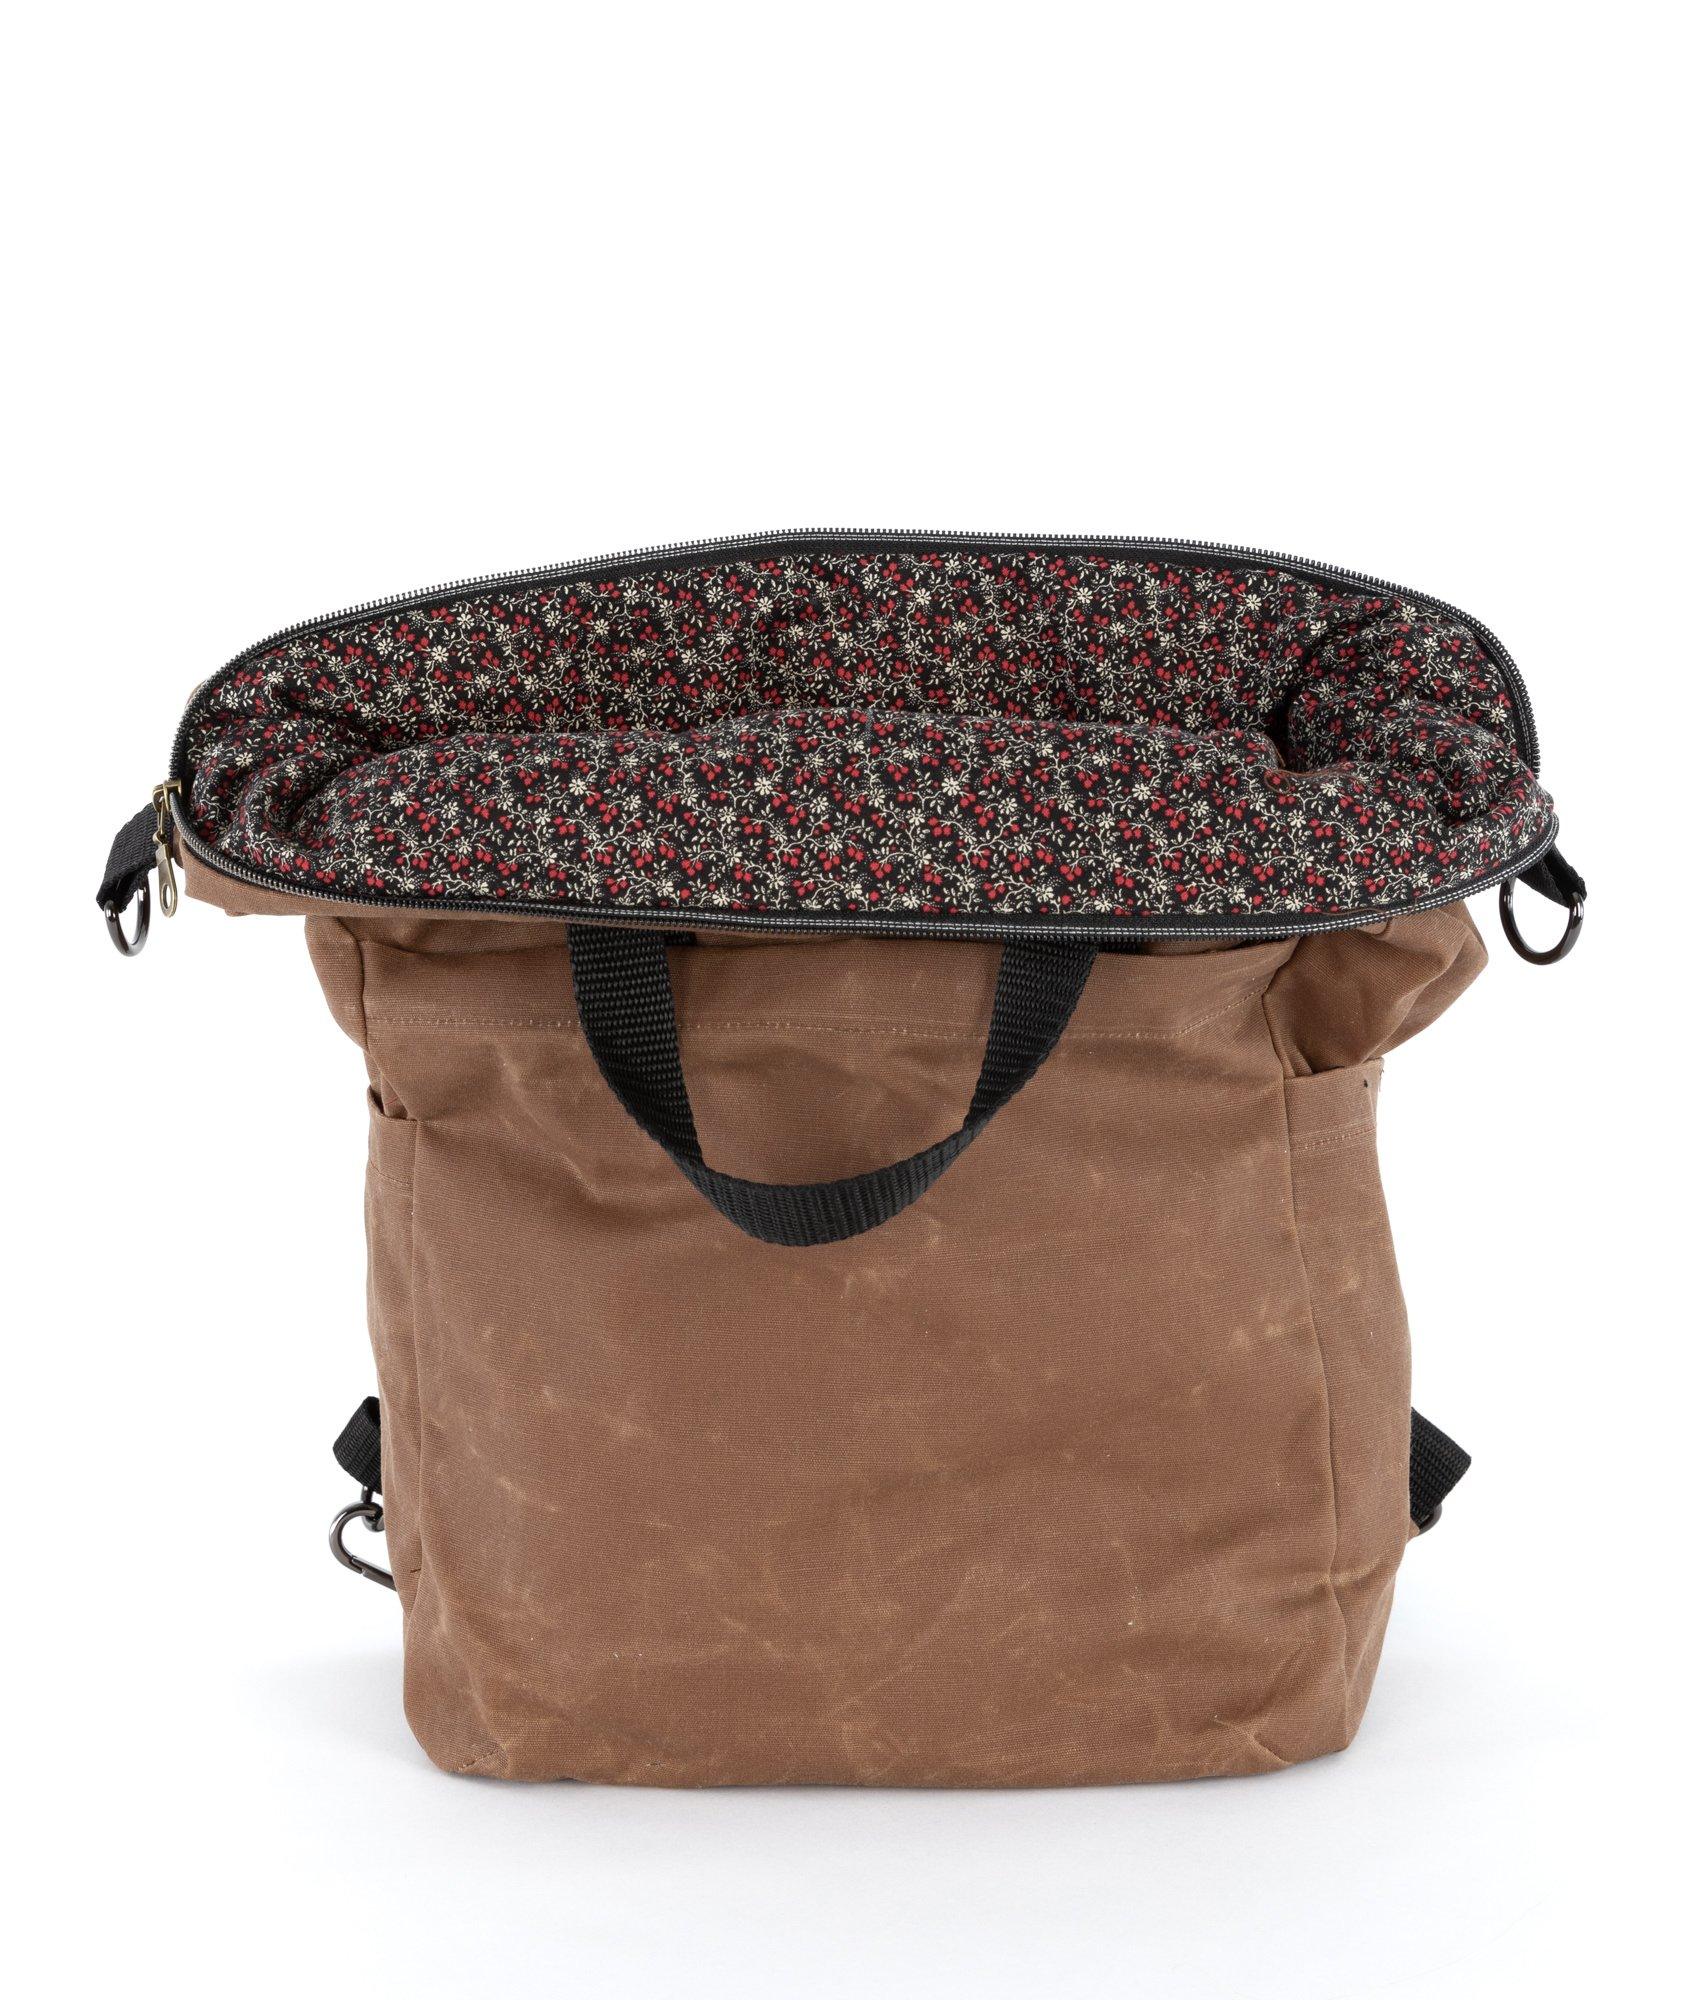 The Vega bag is fully lined. This waxed canvas bag is lined with liberty-style quilting cotton.